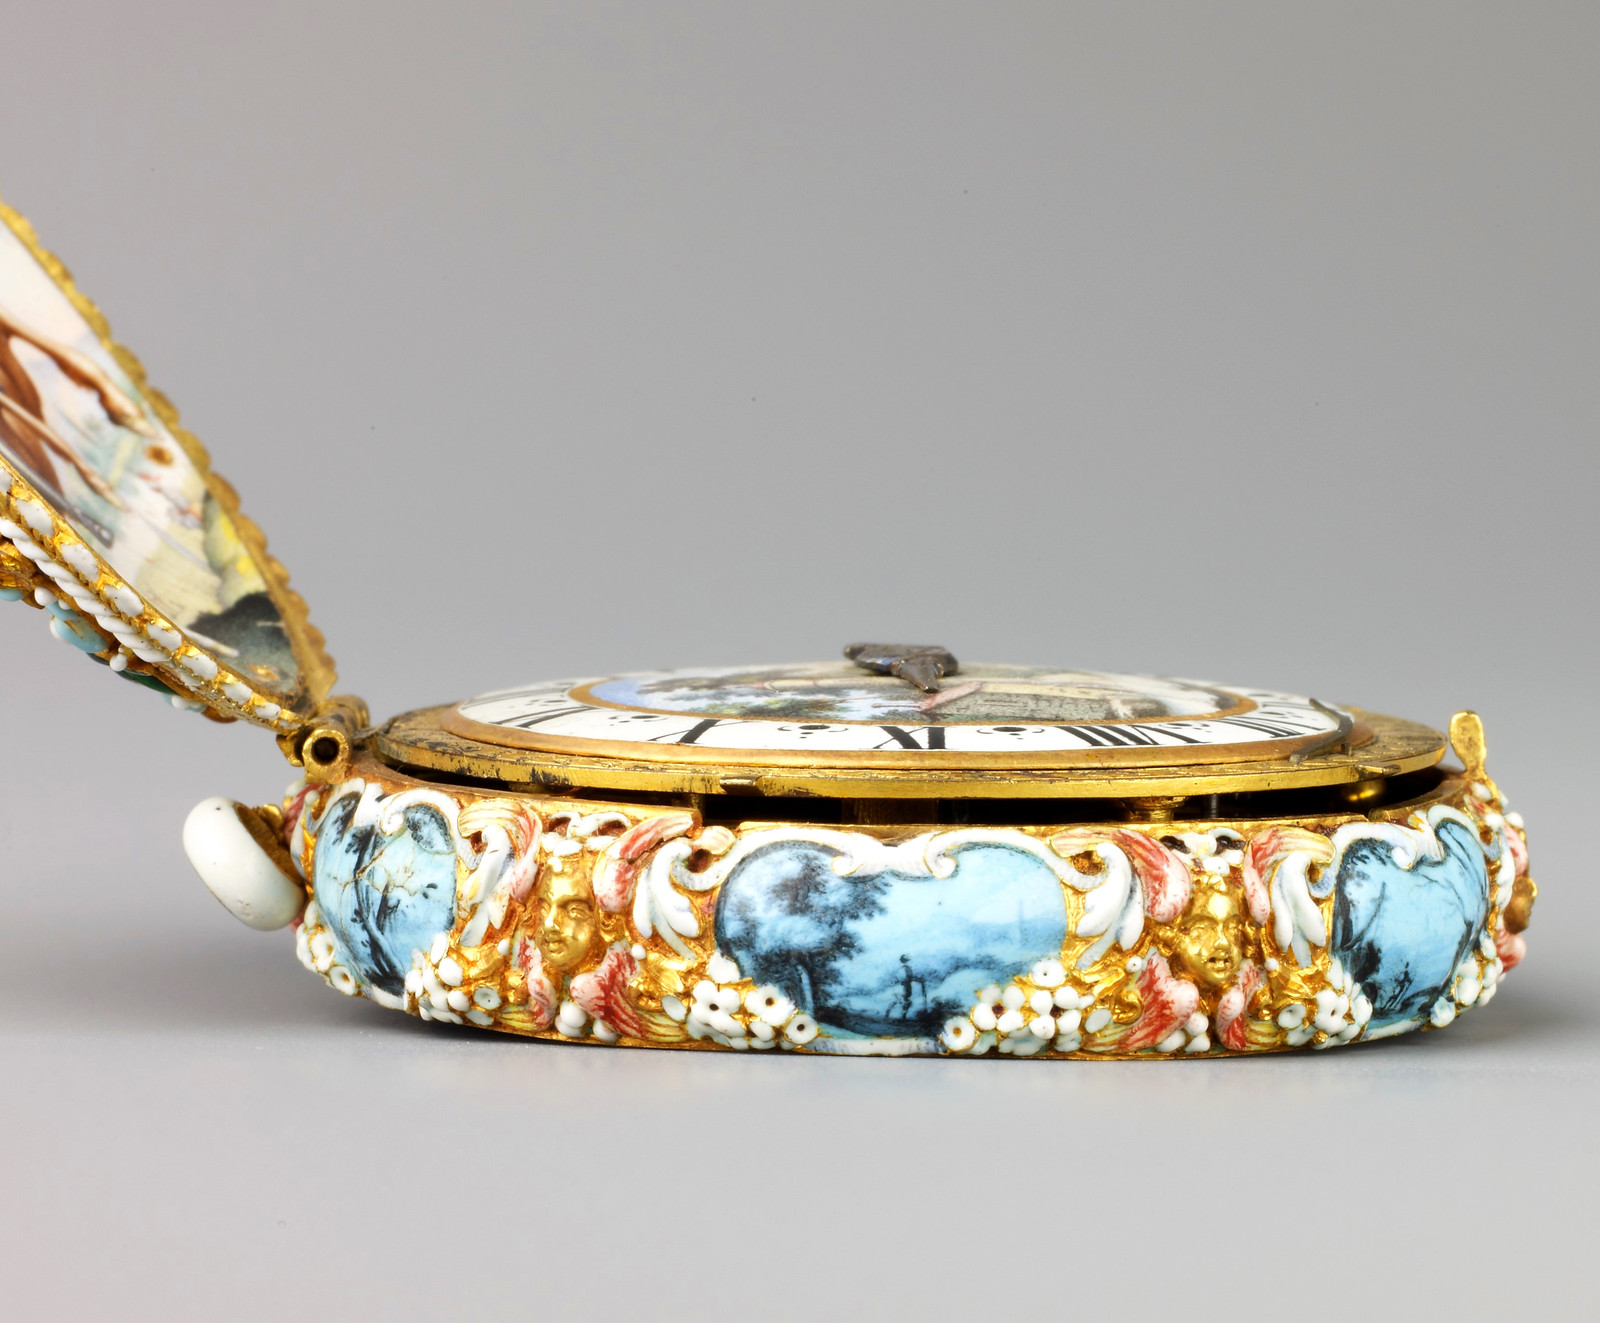 1645. Watch. Jacques Goullons. Case and dial of enameled gold; hand of steel; movement of brass, partly gilded, and steel. metmuseum2